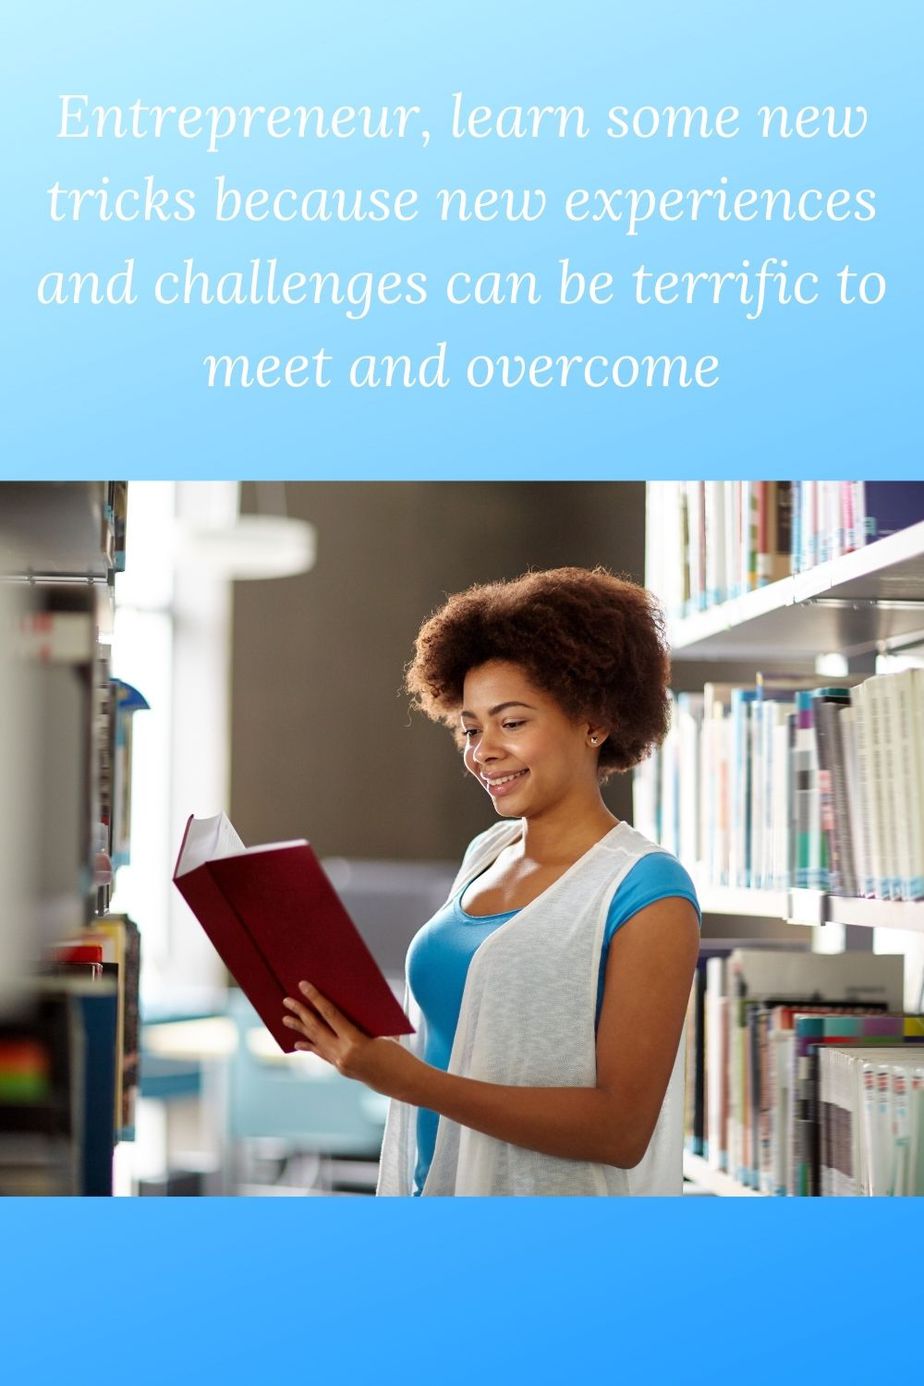 african american woman in a librry with a book and the words Entrepreneur, learn some new tricks because new experiences and challenges can be terrific to meet and overcome